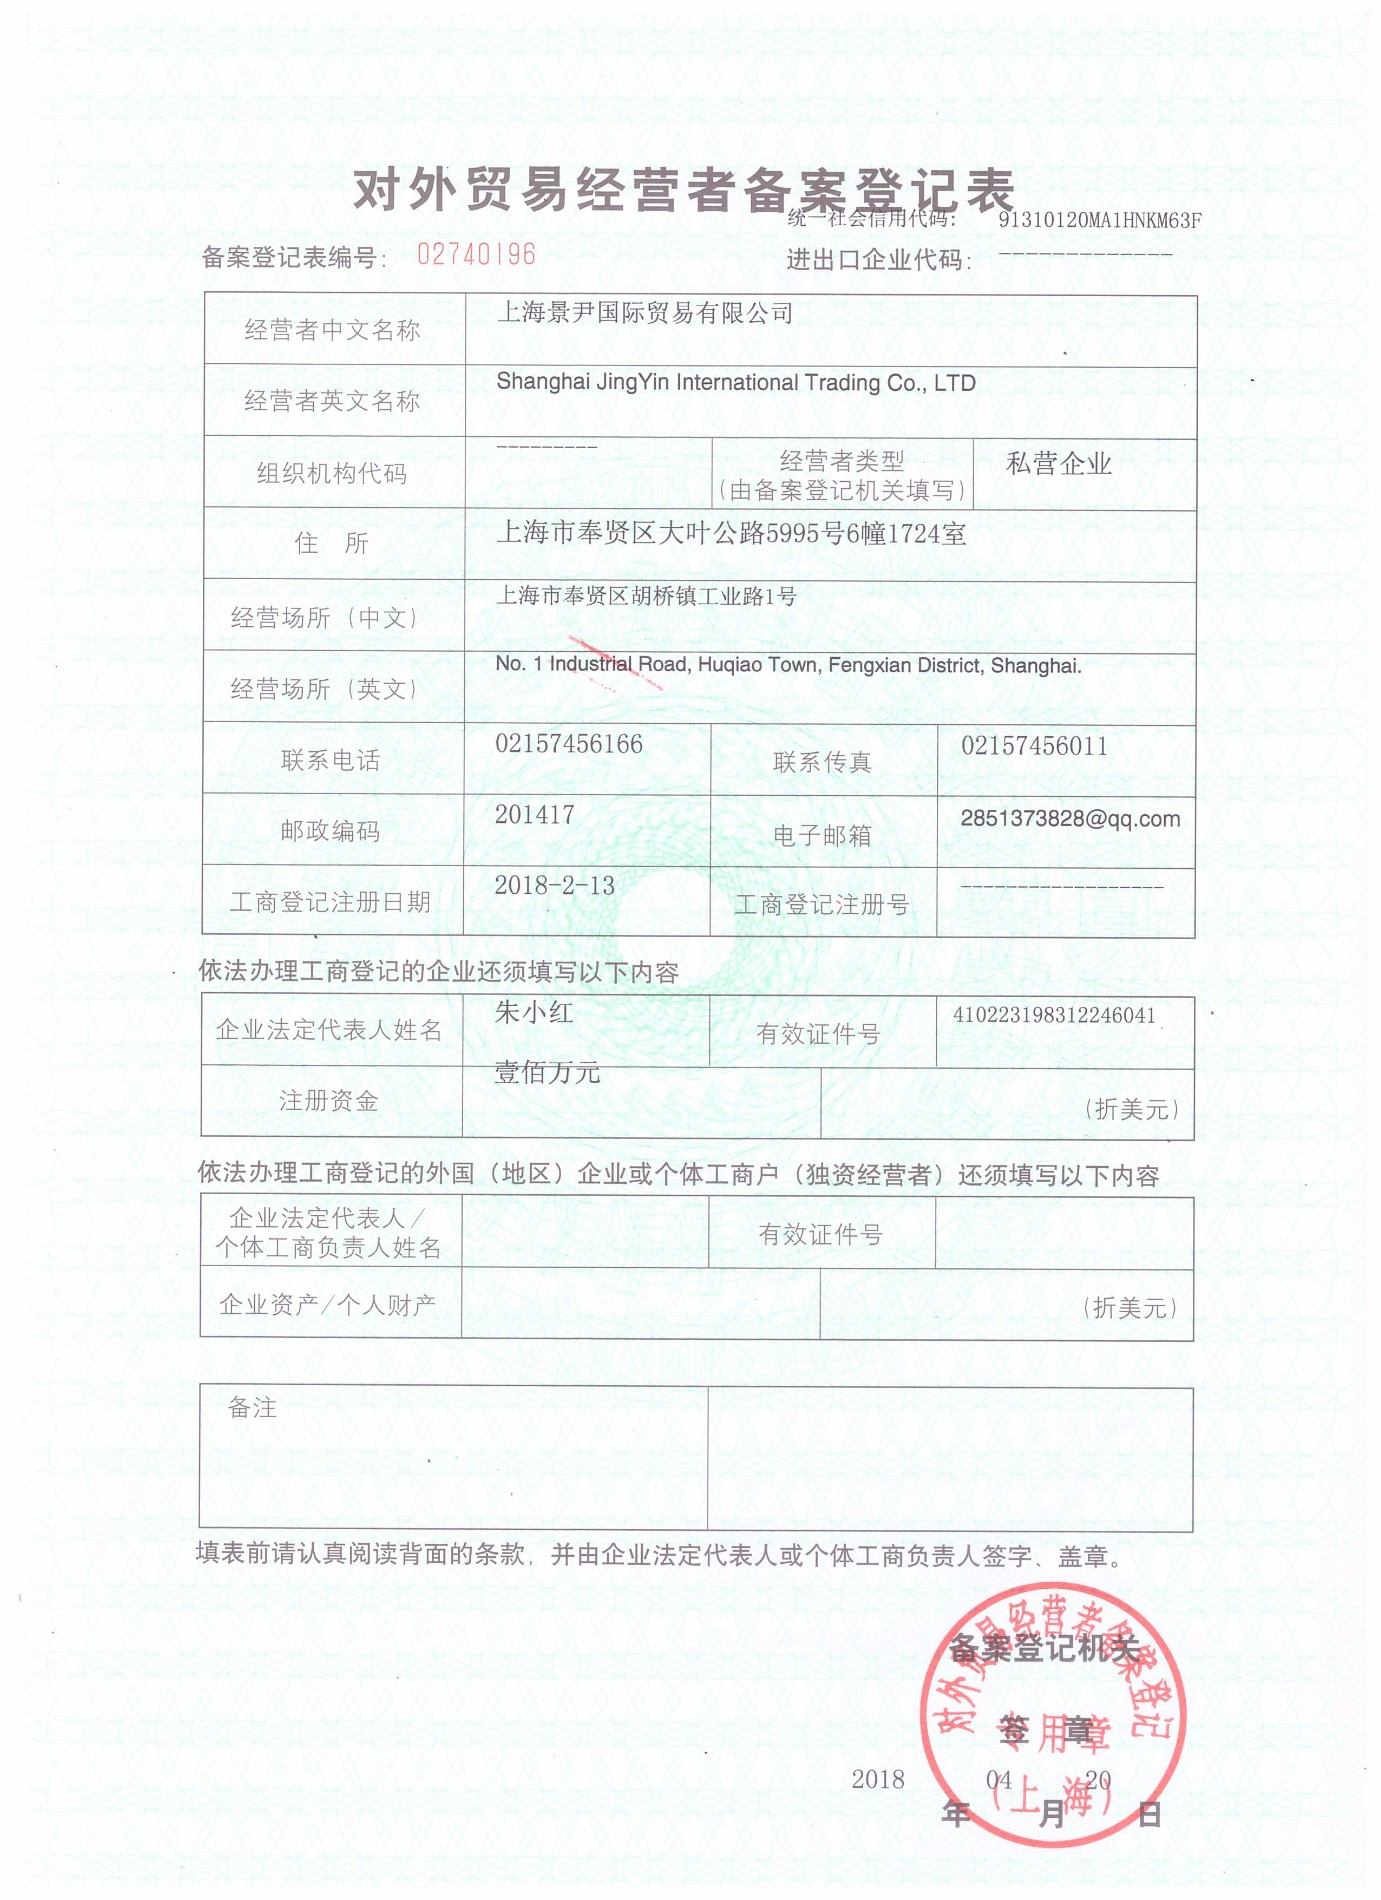 Foreign Trade Record Registration Form